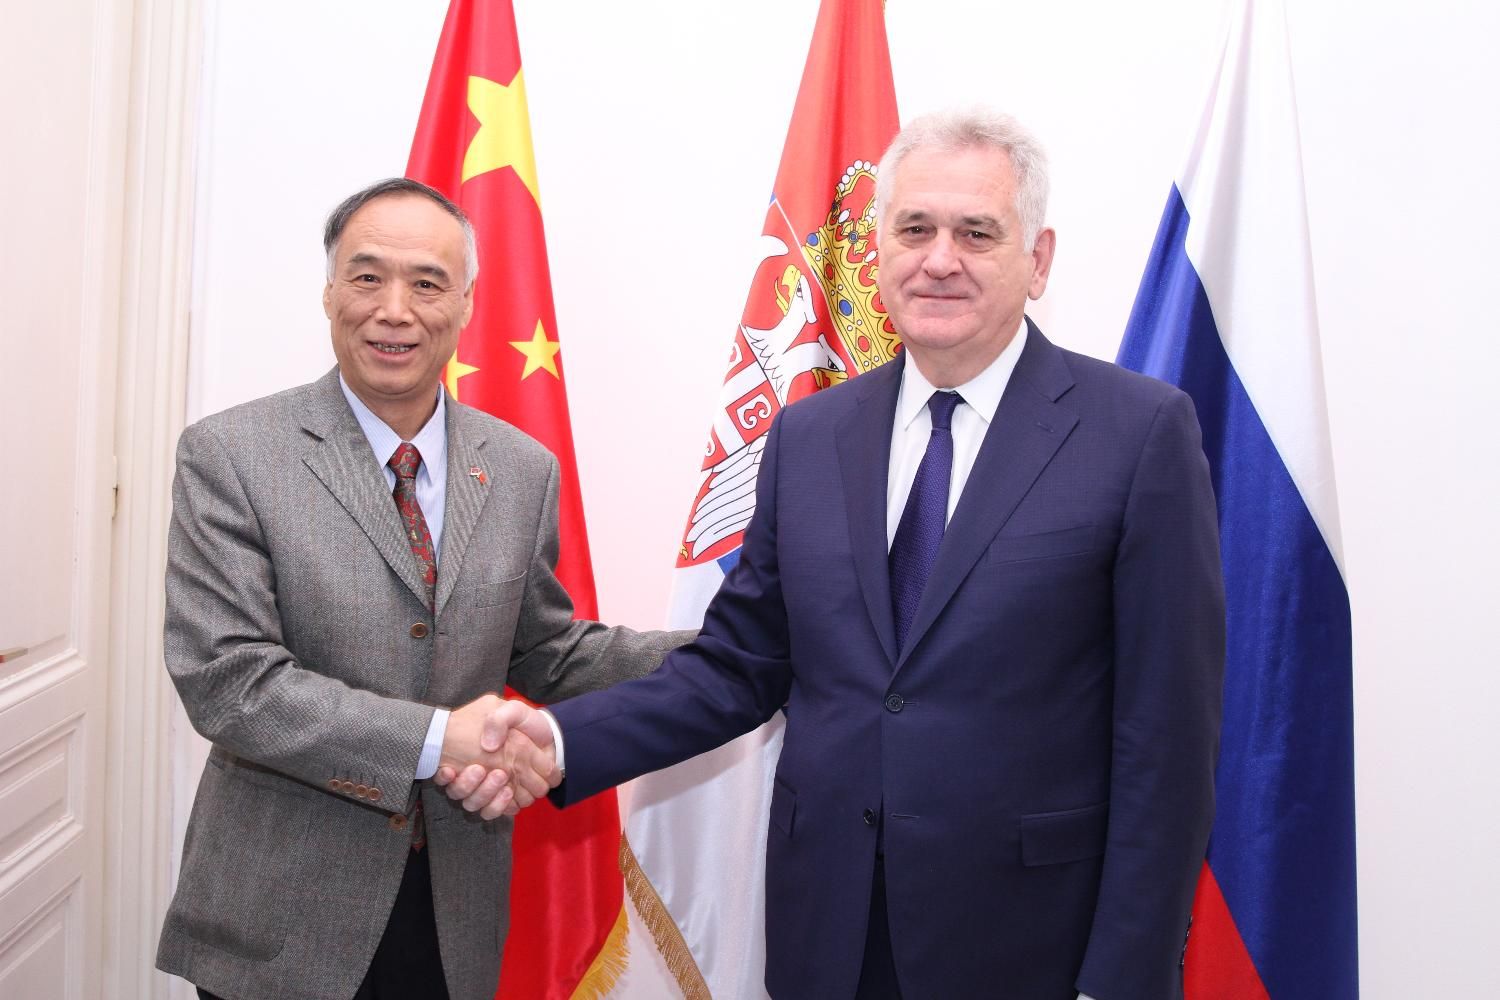  National Council President Nikolić meets Ambassador of P. R. China to discuss priority projects at the core of Serbia-China economic cooperation 